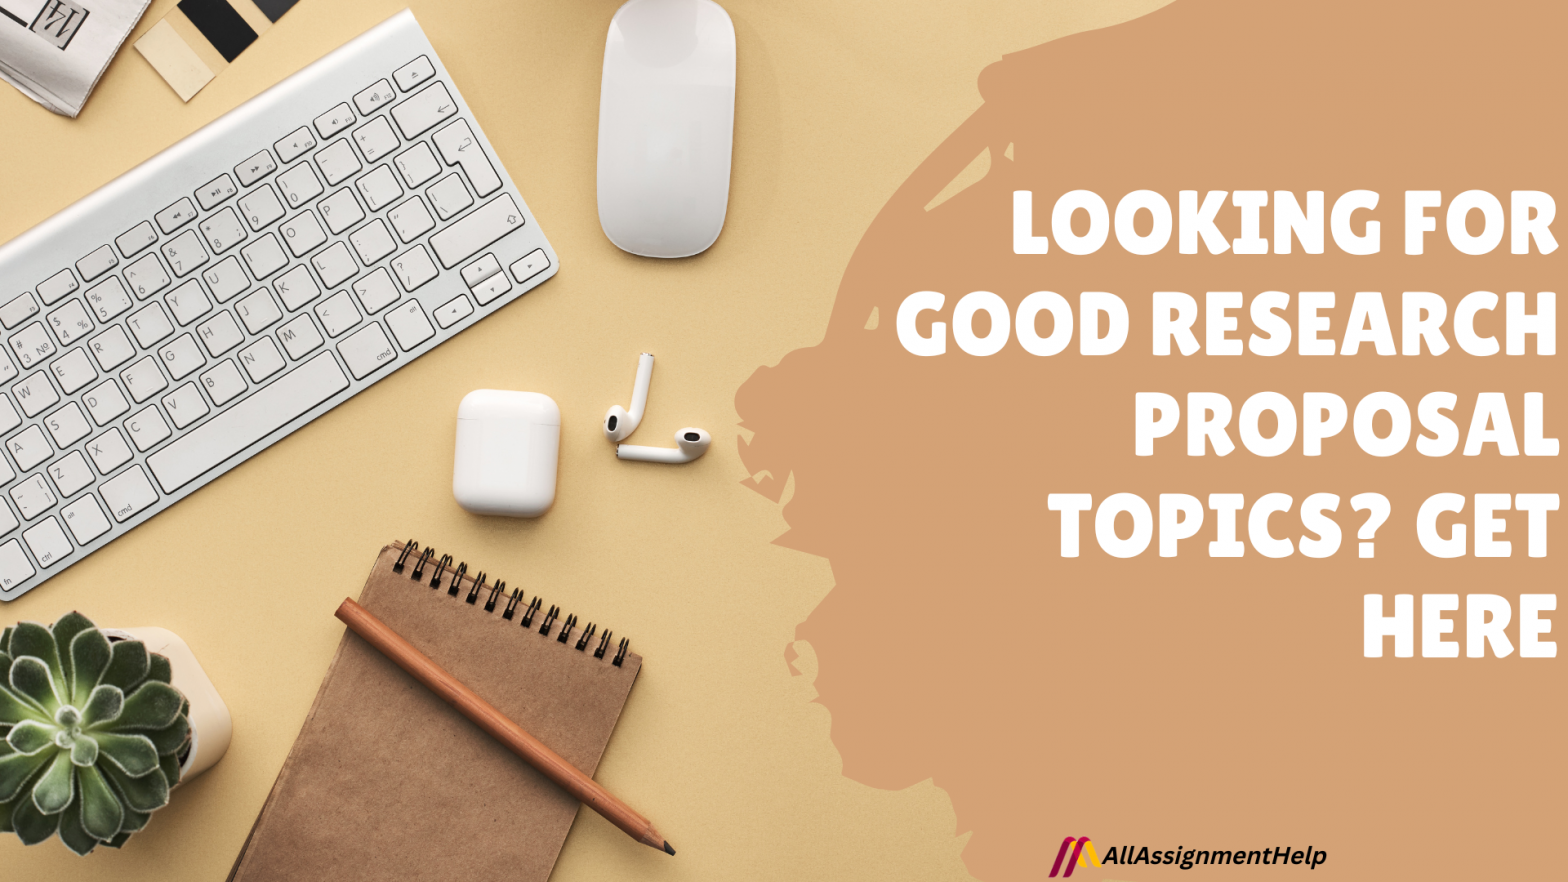 Looking For Good Research Proposal Topics? Get Here